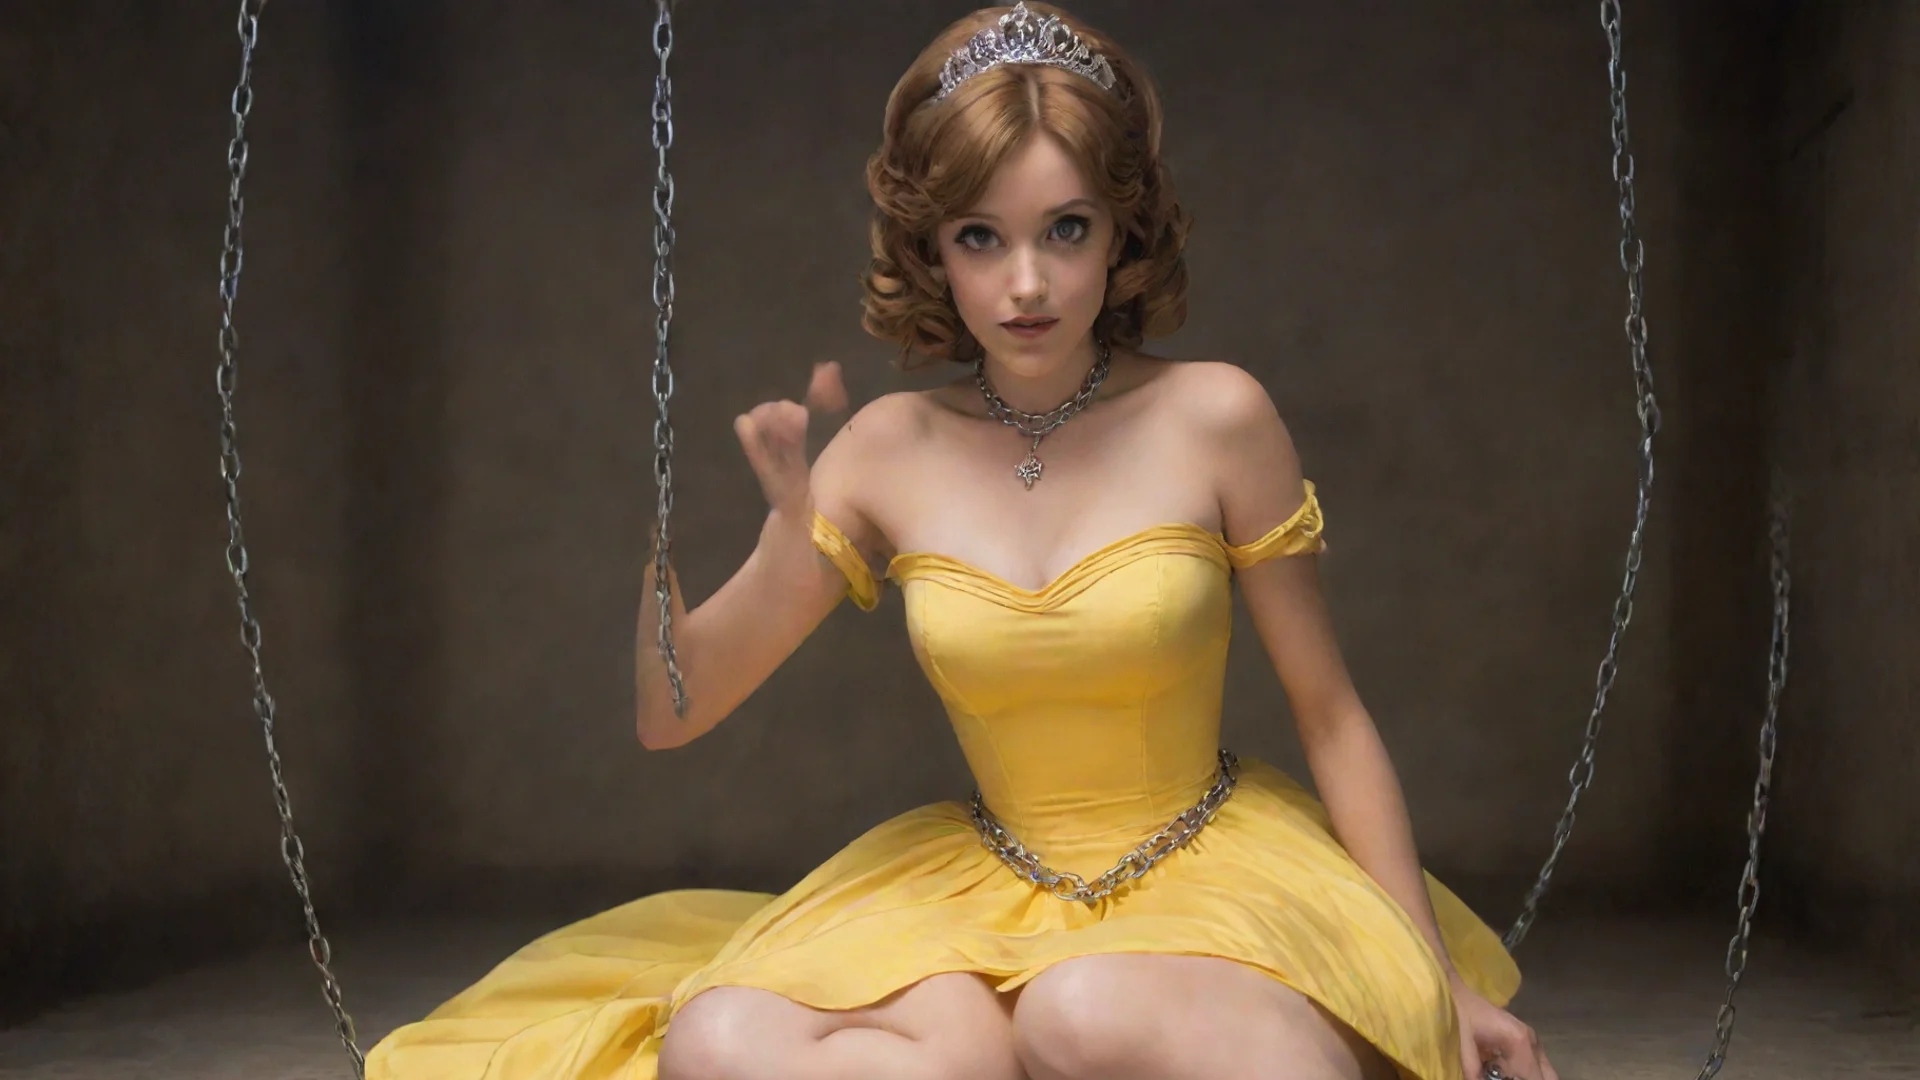 aitrending princess daisy restrained by chains in her yellow dress good looking fantastic 1 wide